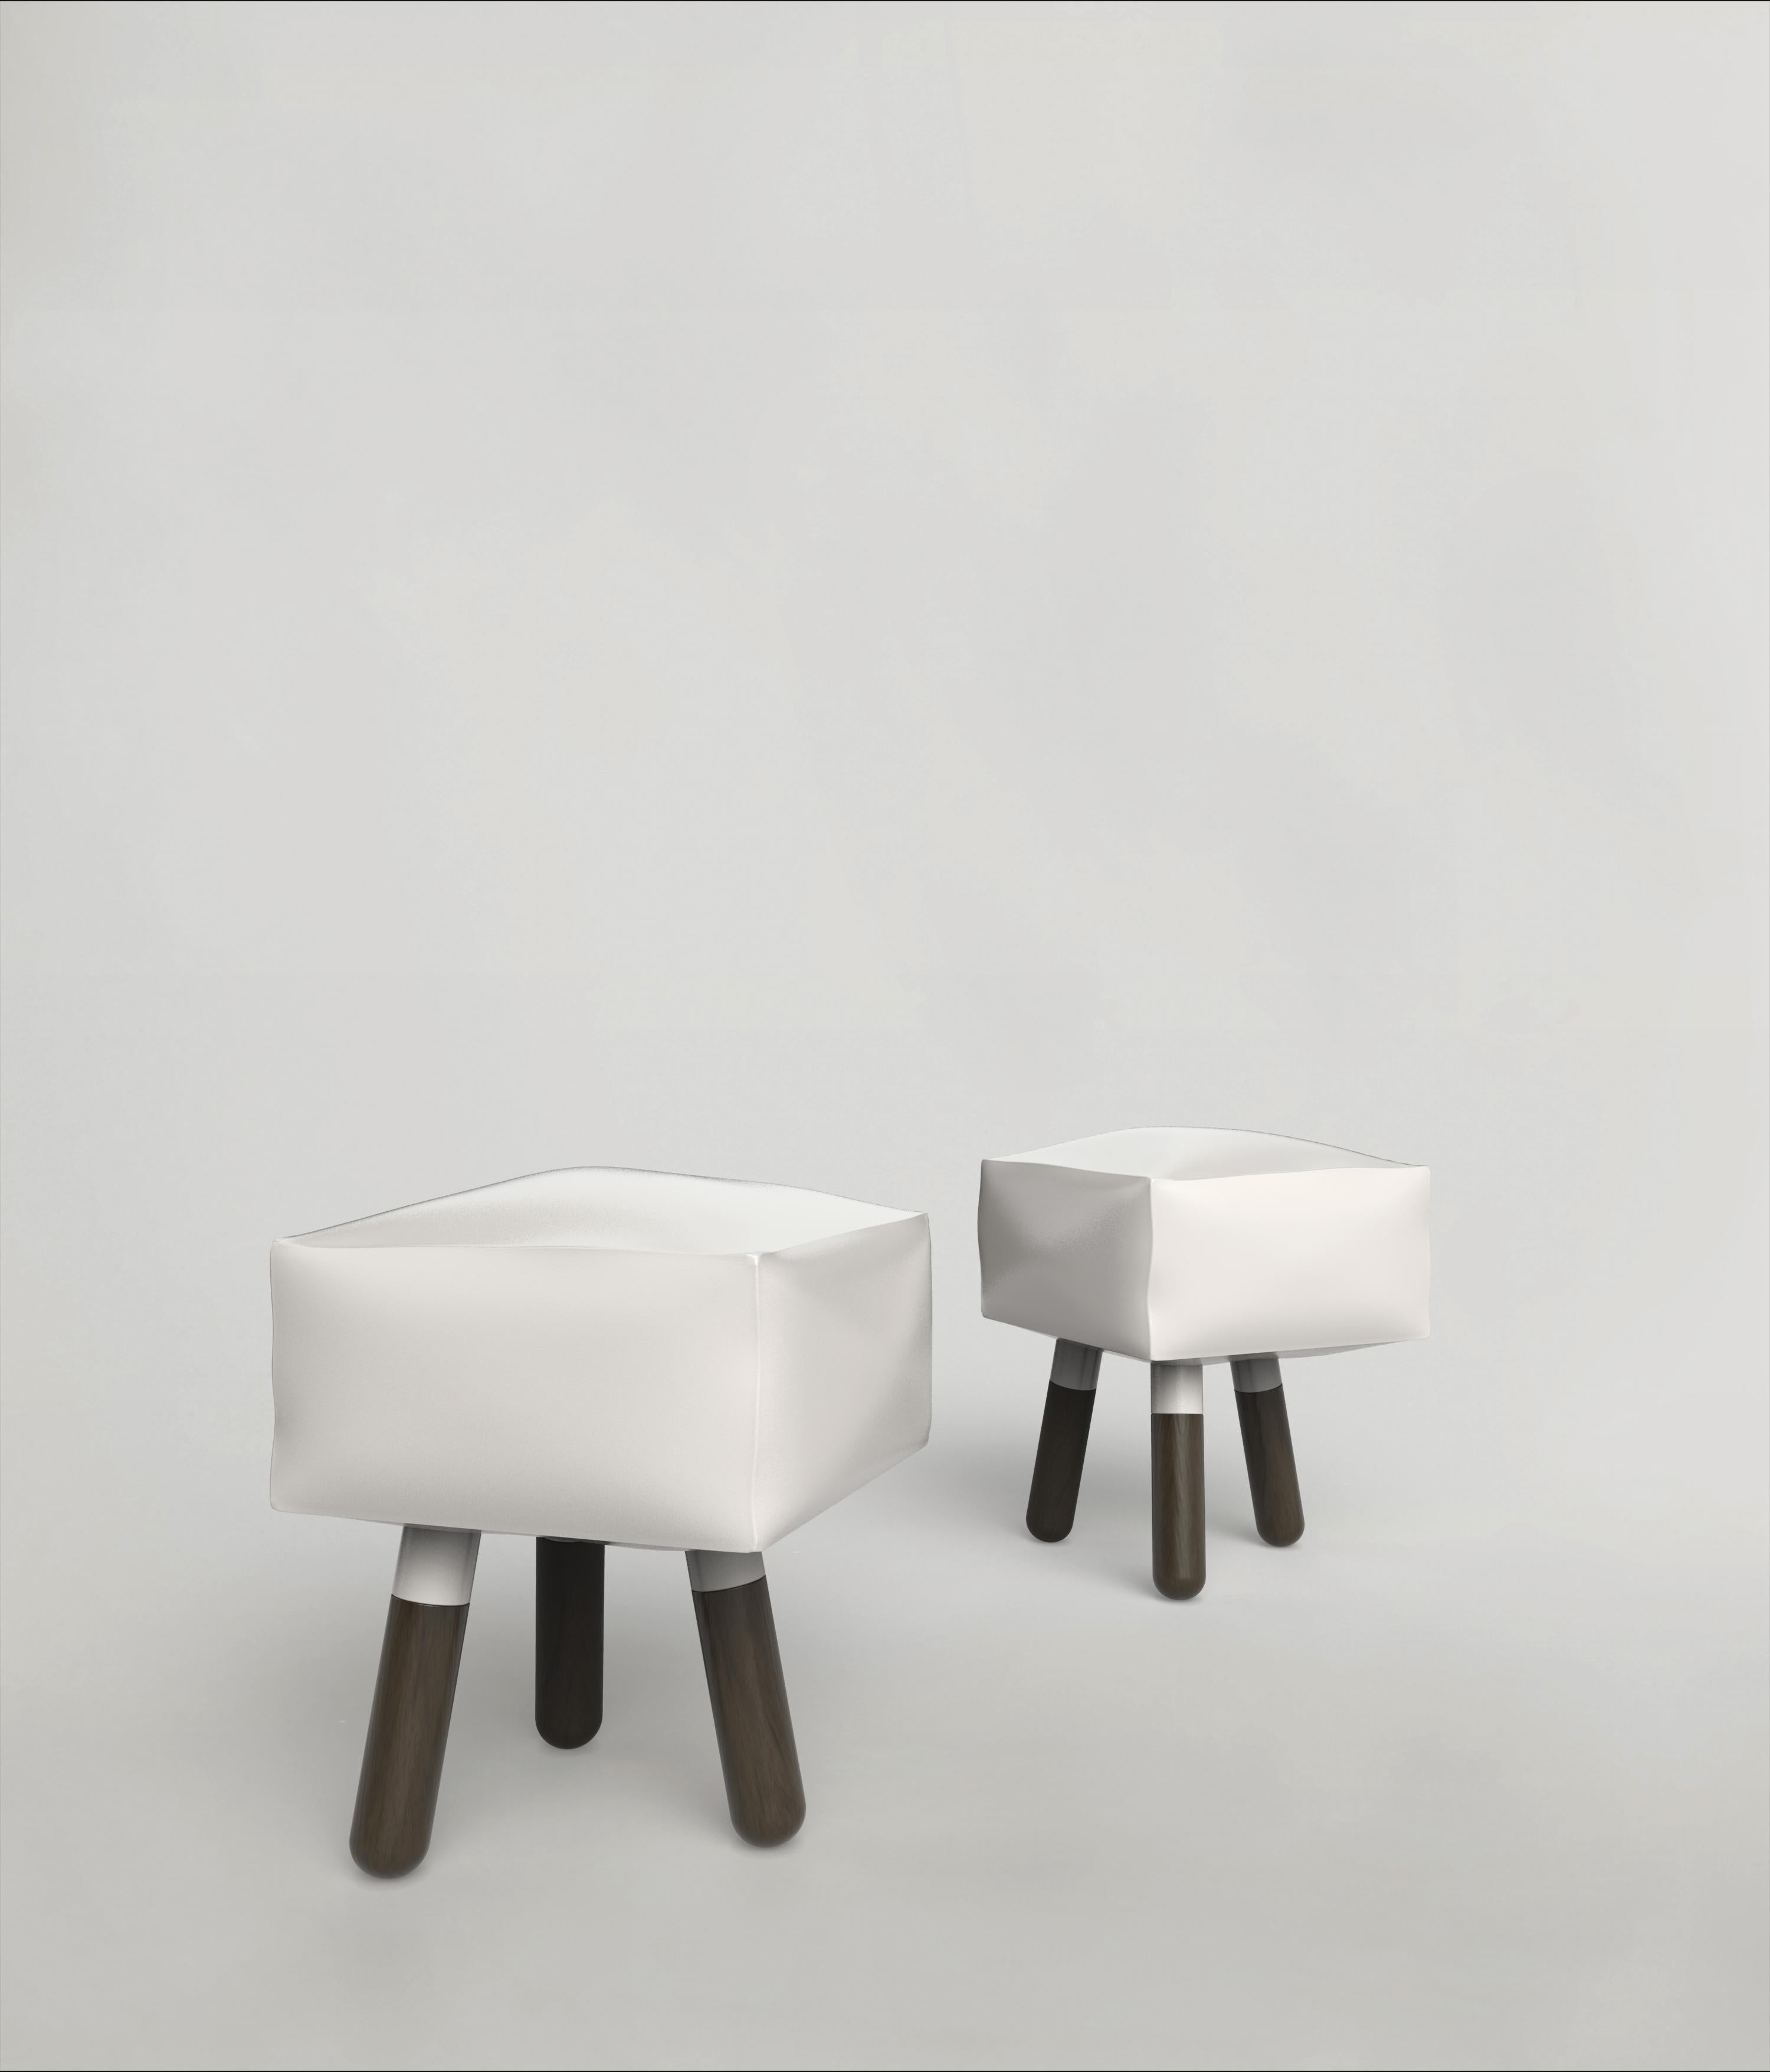 Polished Contemporary Limited Edition White Brass Stool, Icenine V2 by Edizione Limitata